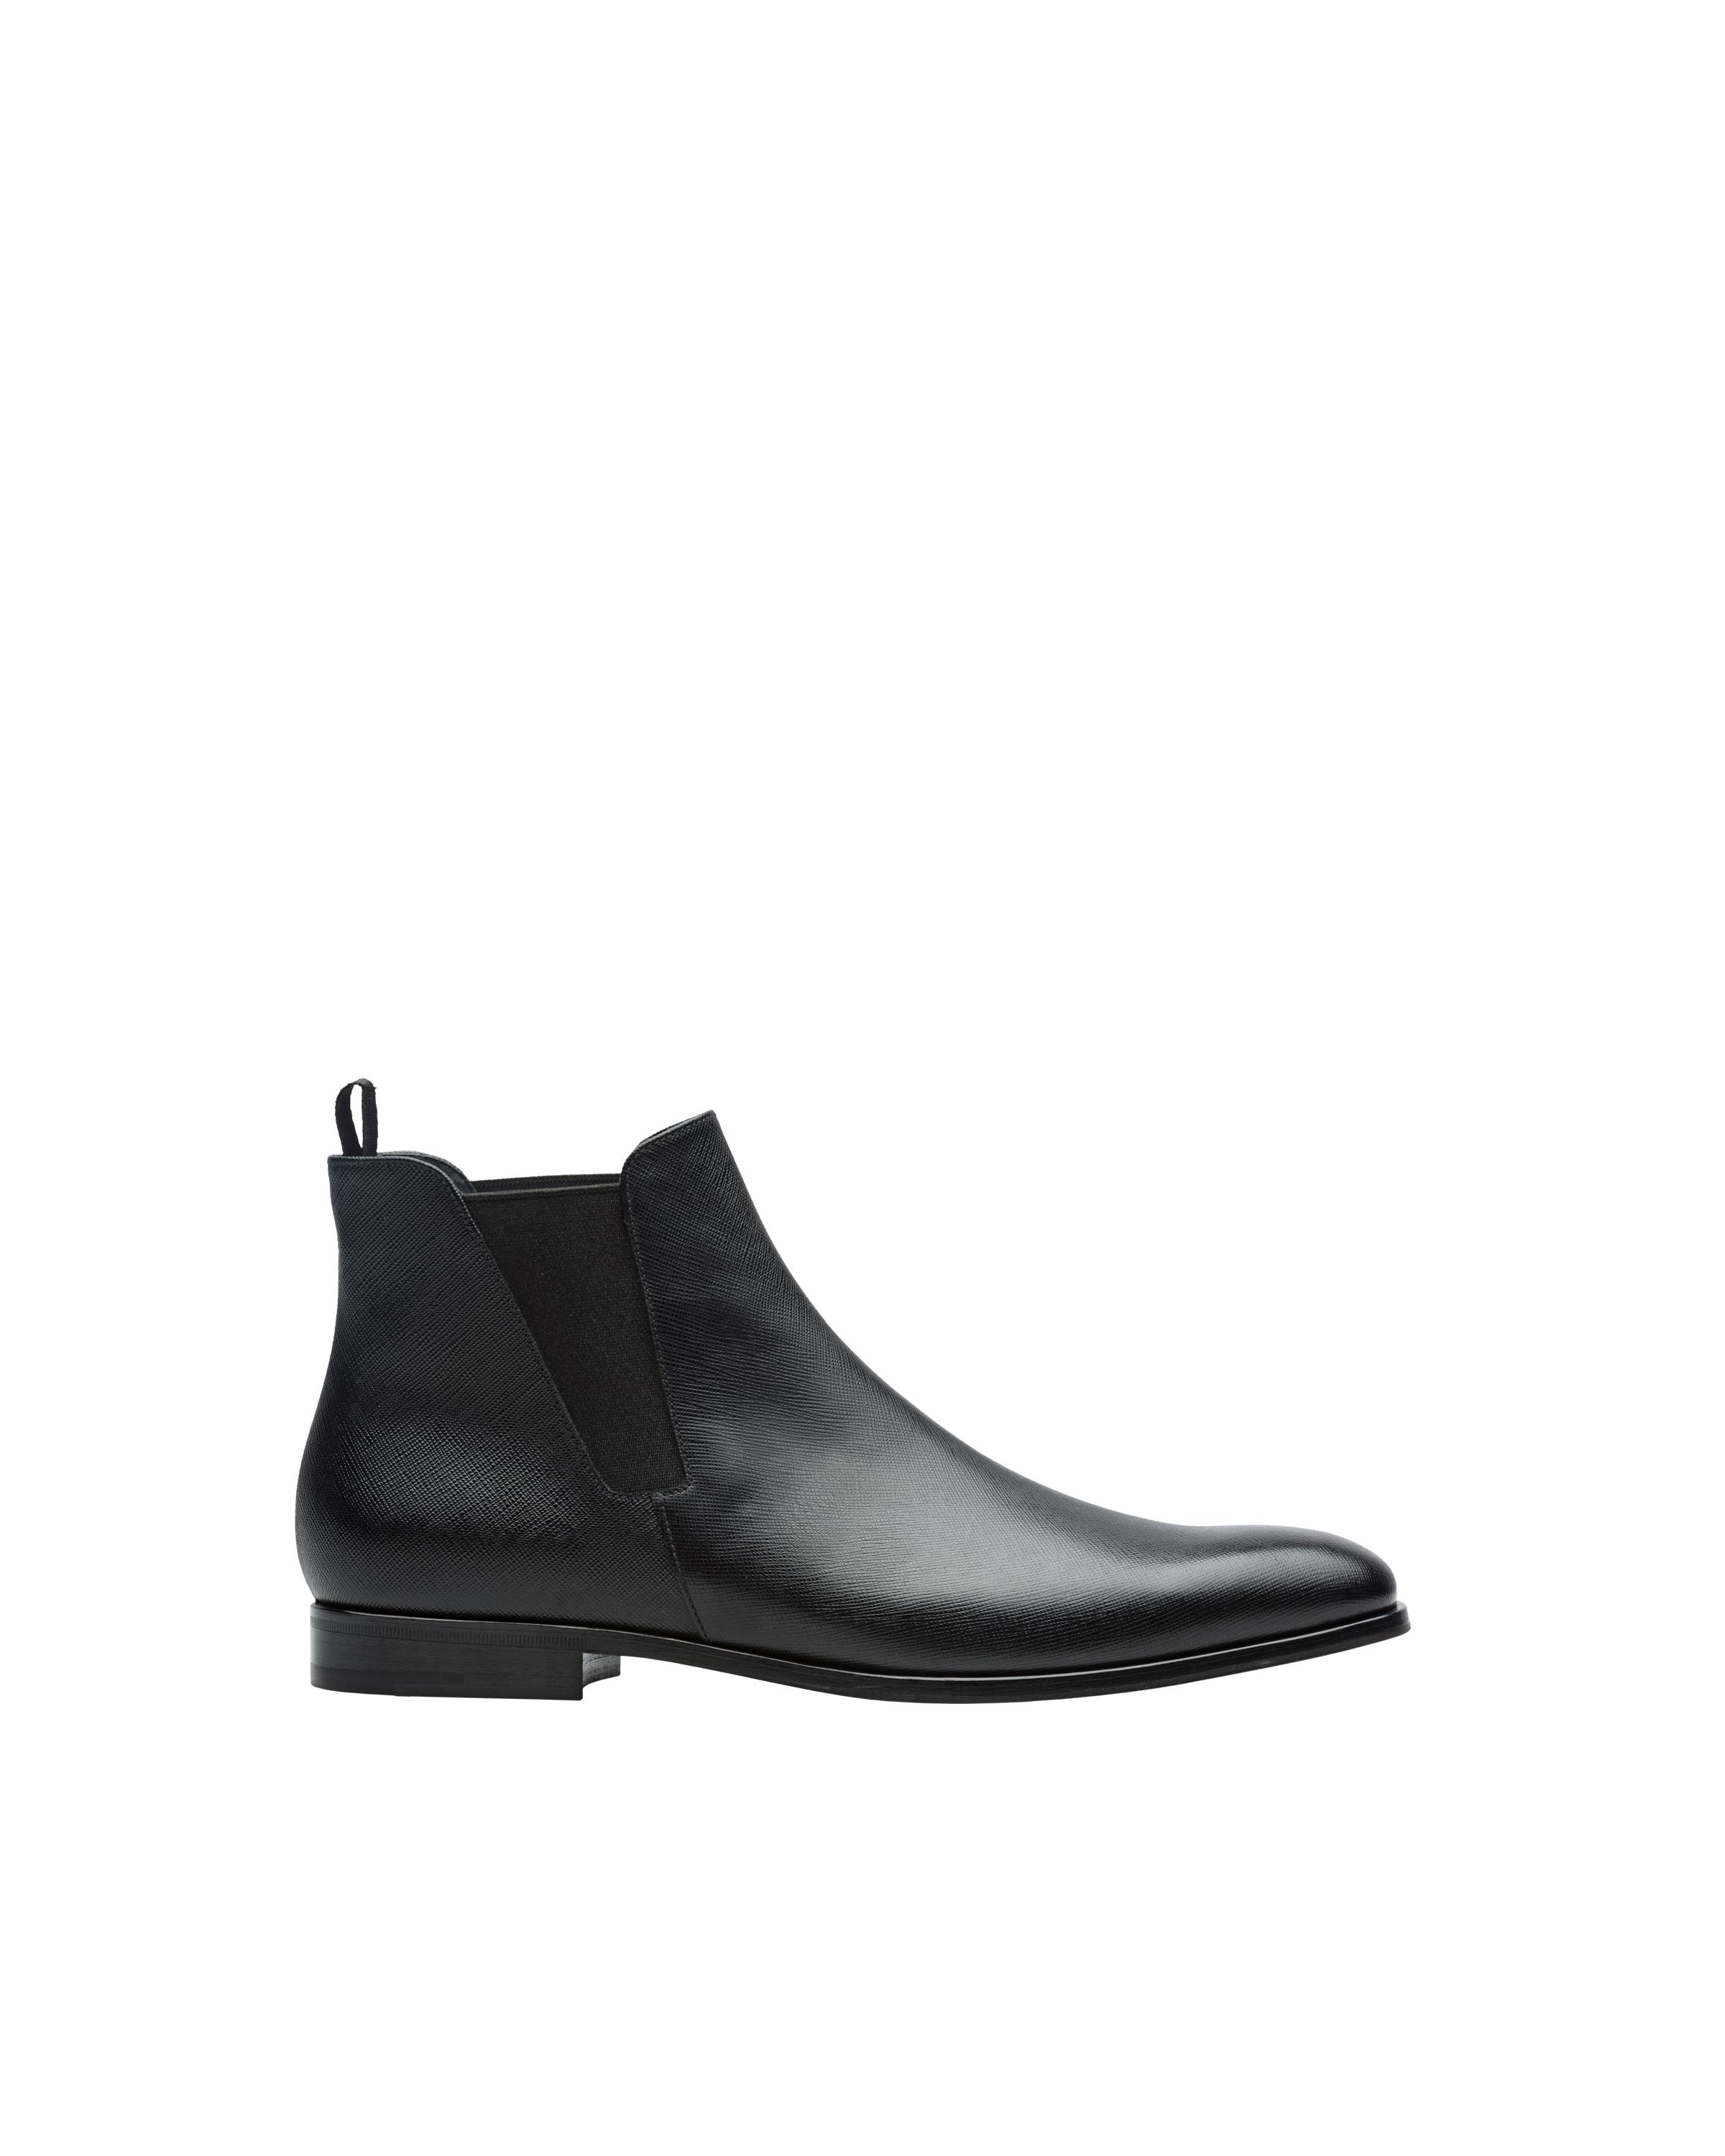 Prada Leather Brushed Chelsea Boots in Nero (Black) for Men - Save 48% -  Lyst